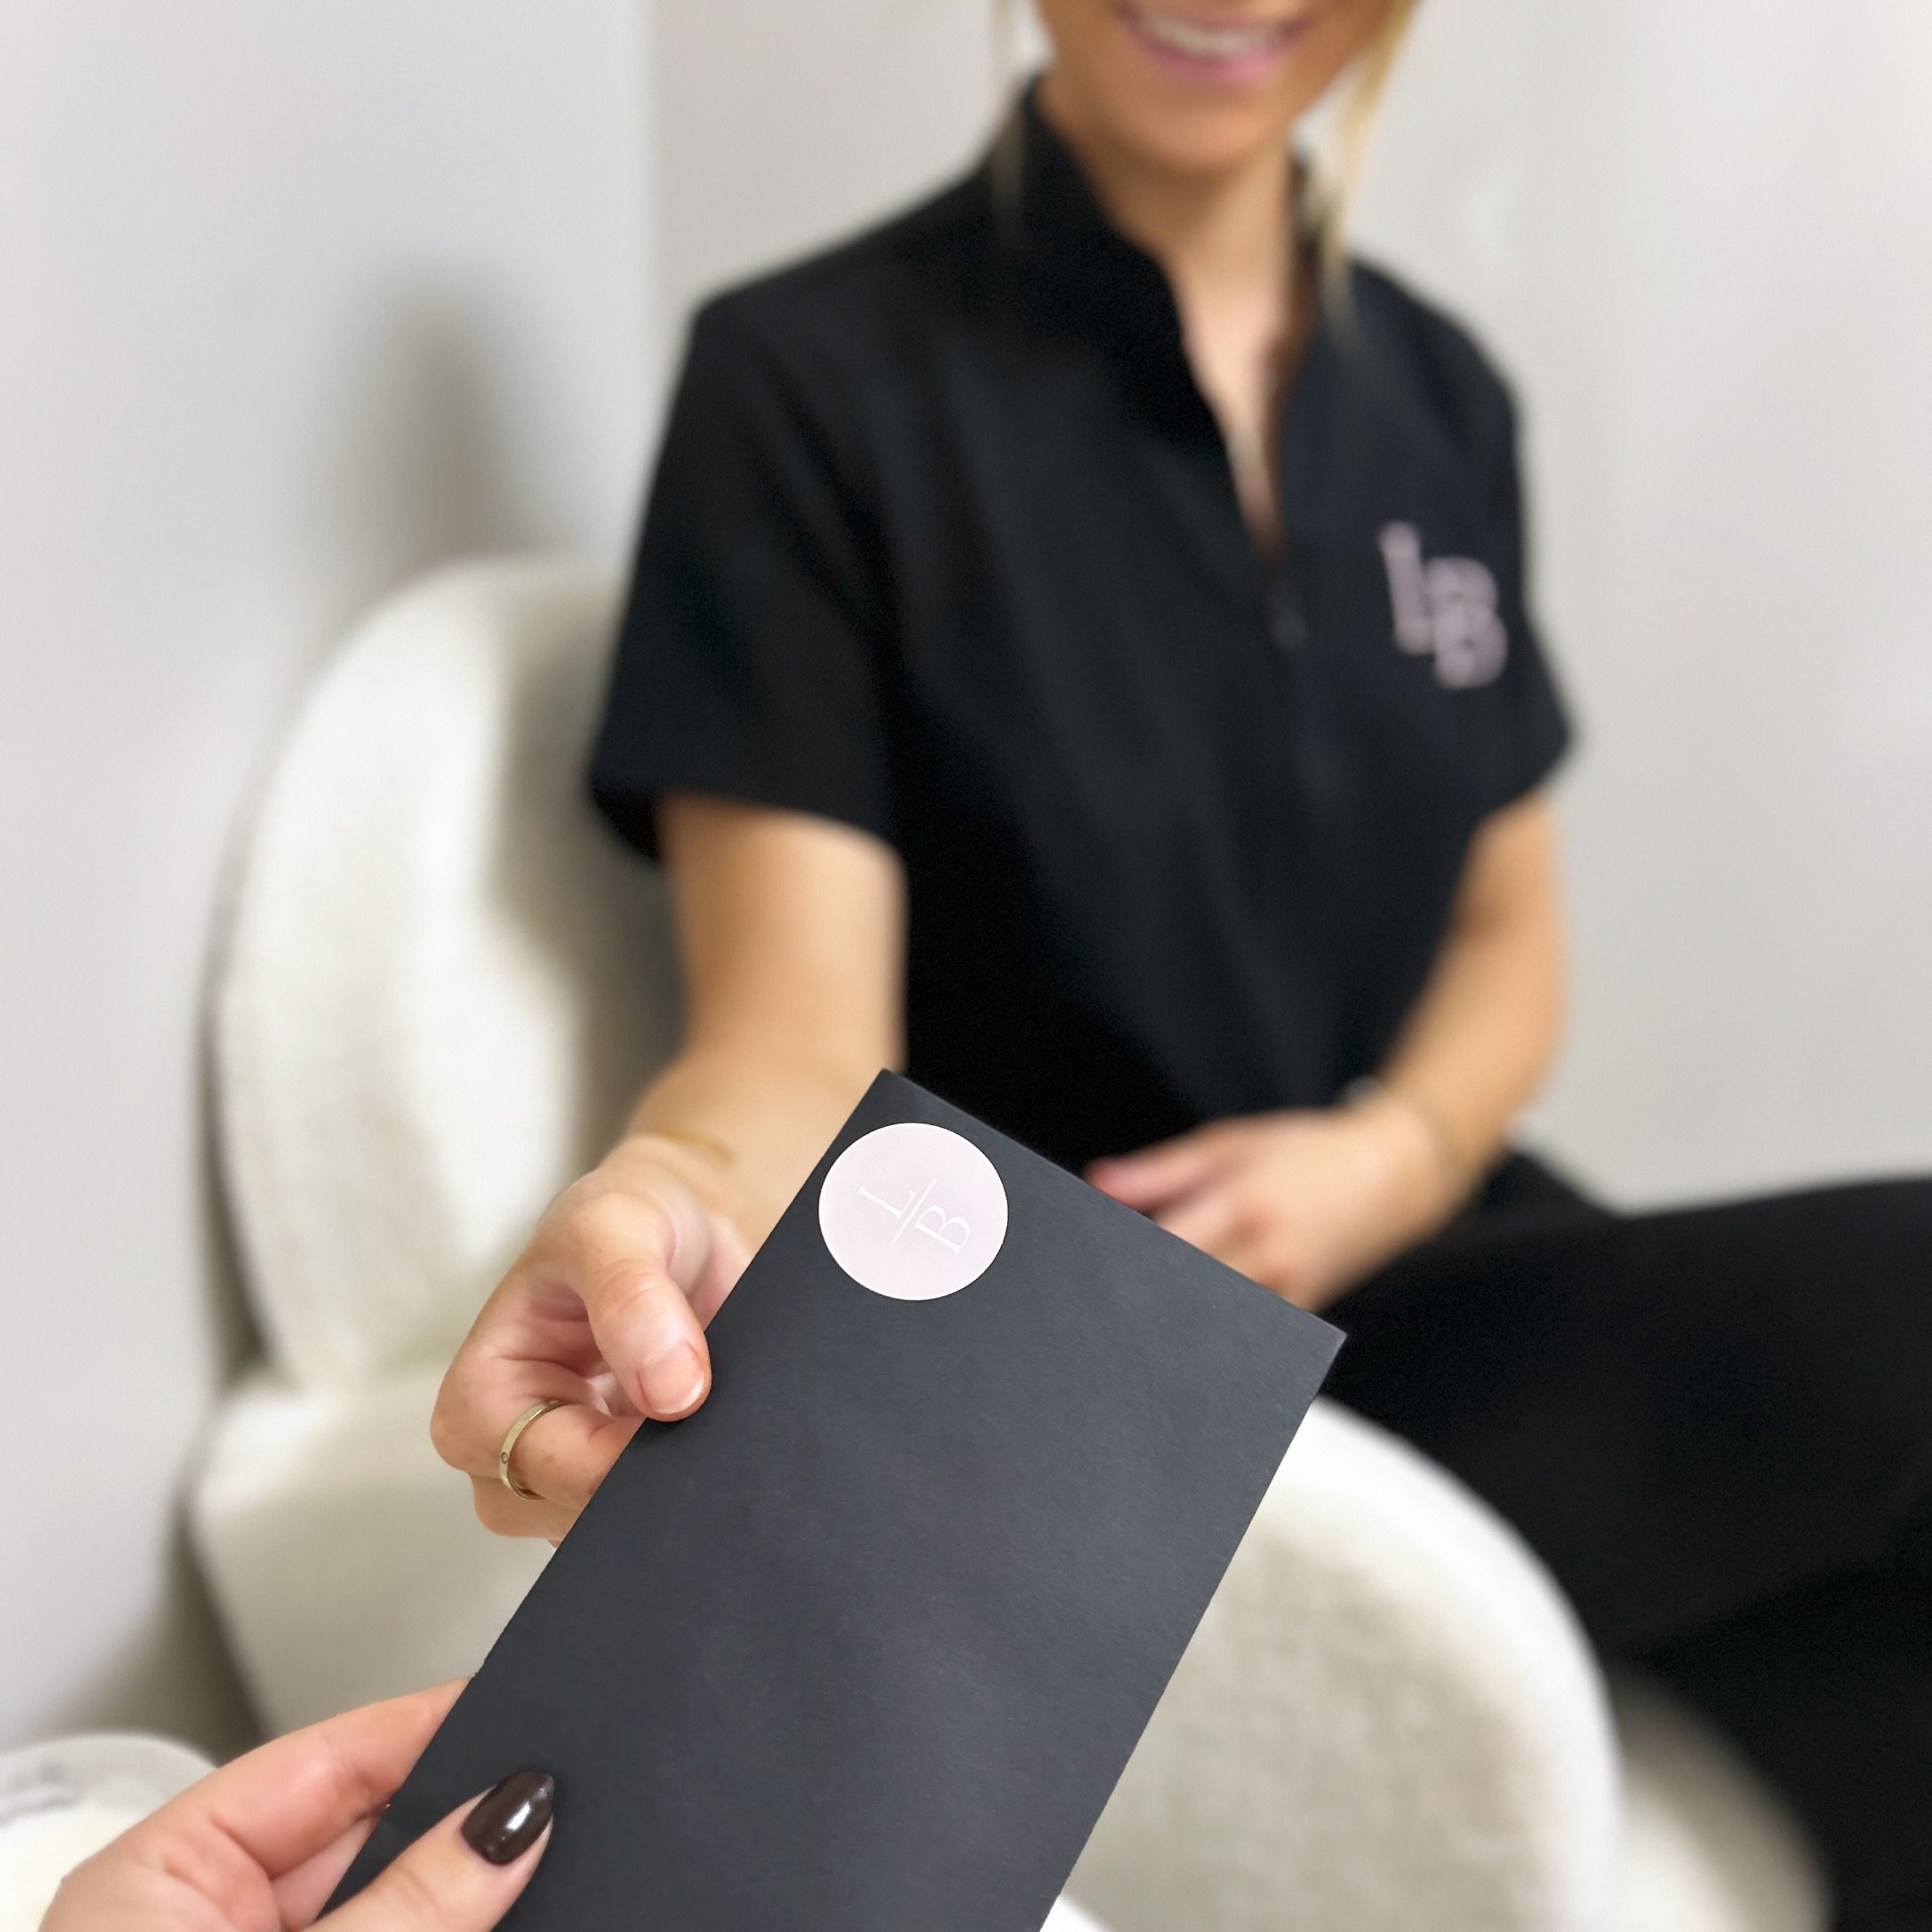 Were you lucky enough to receive a La beaute gift voucher ? 

If so now is your chance to book your beautiful treatment! All vouchers can be used for any service or product here at La beaute 🥰

We have availability throughout the weekdays, AND this 